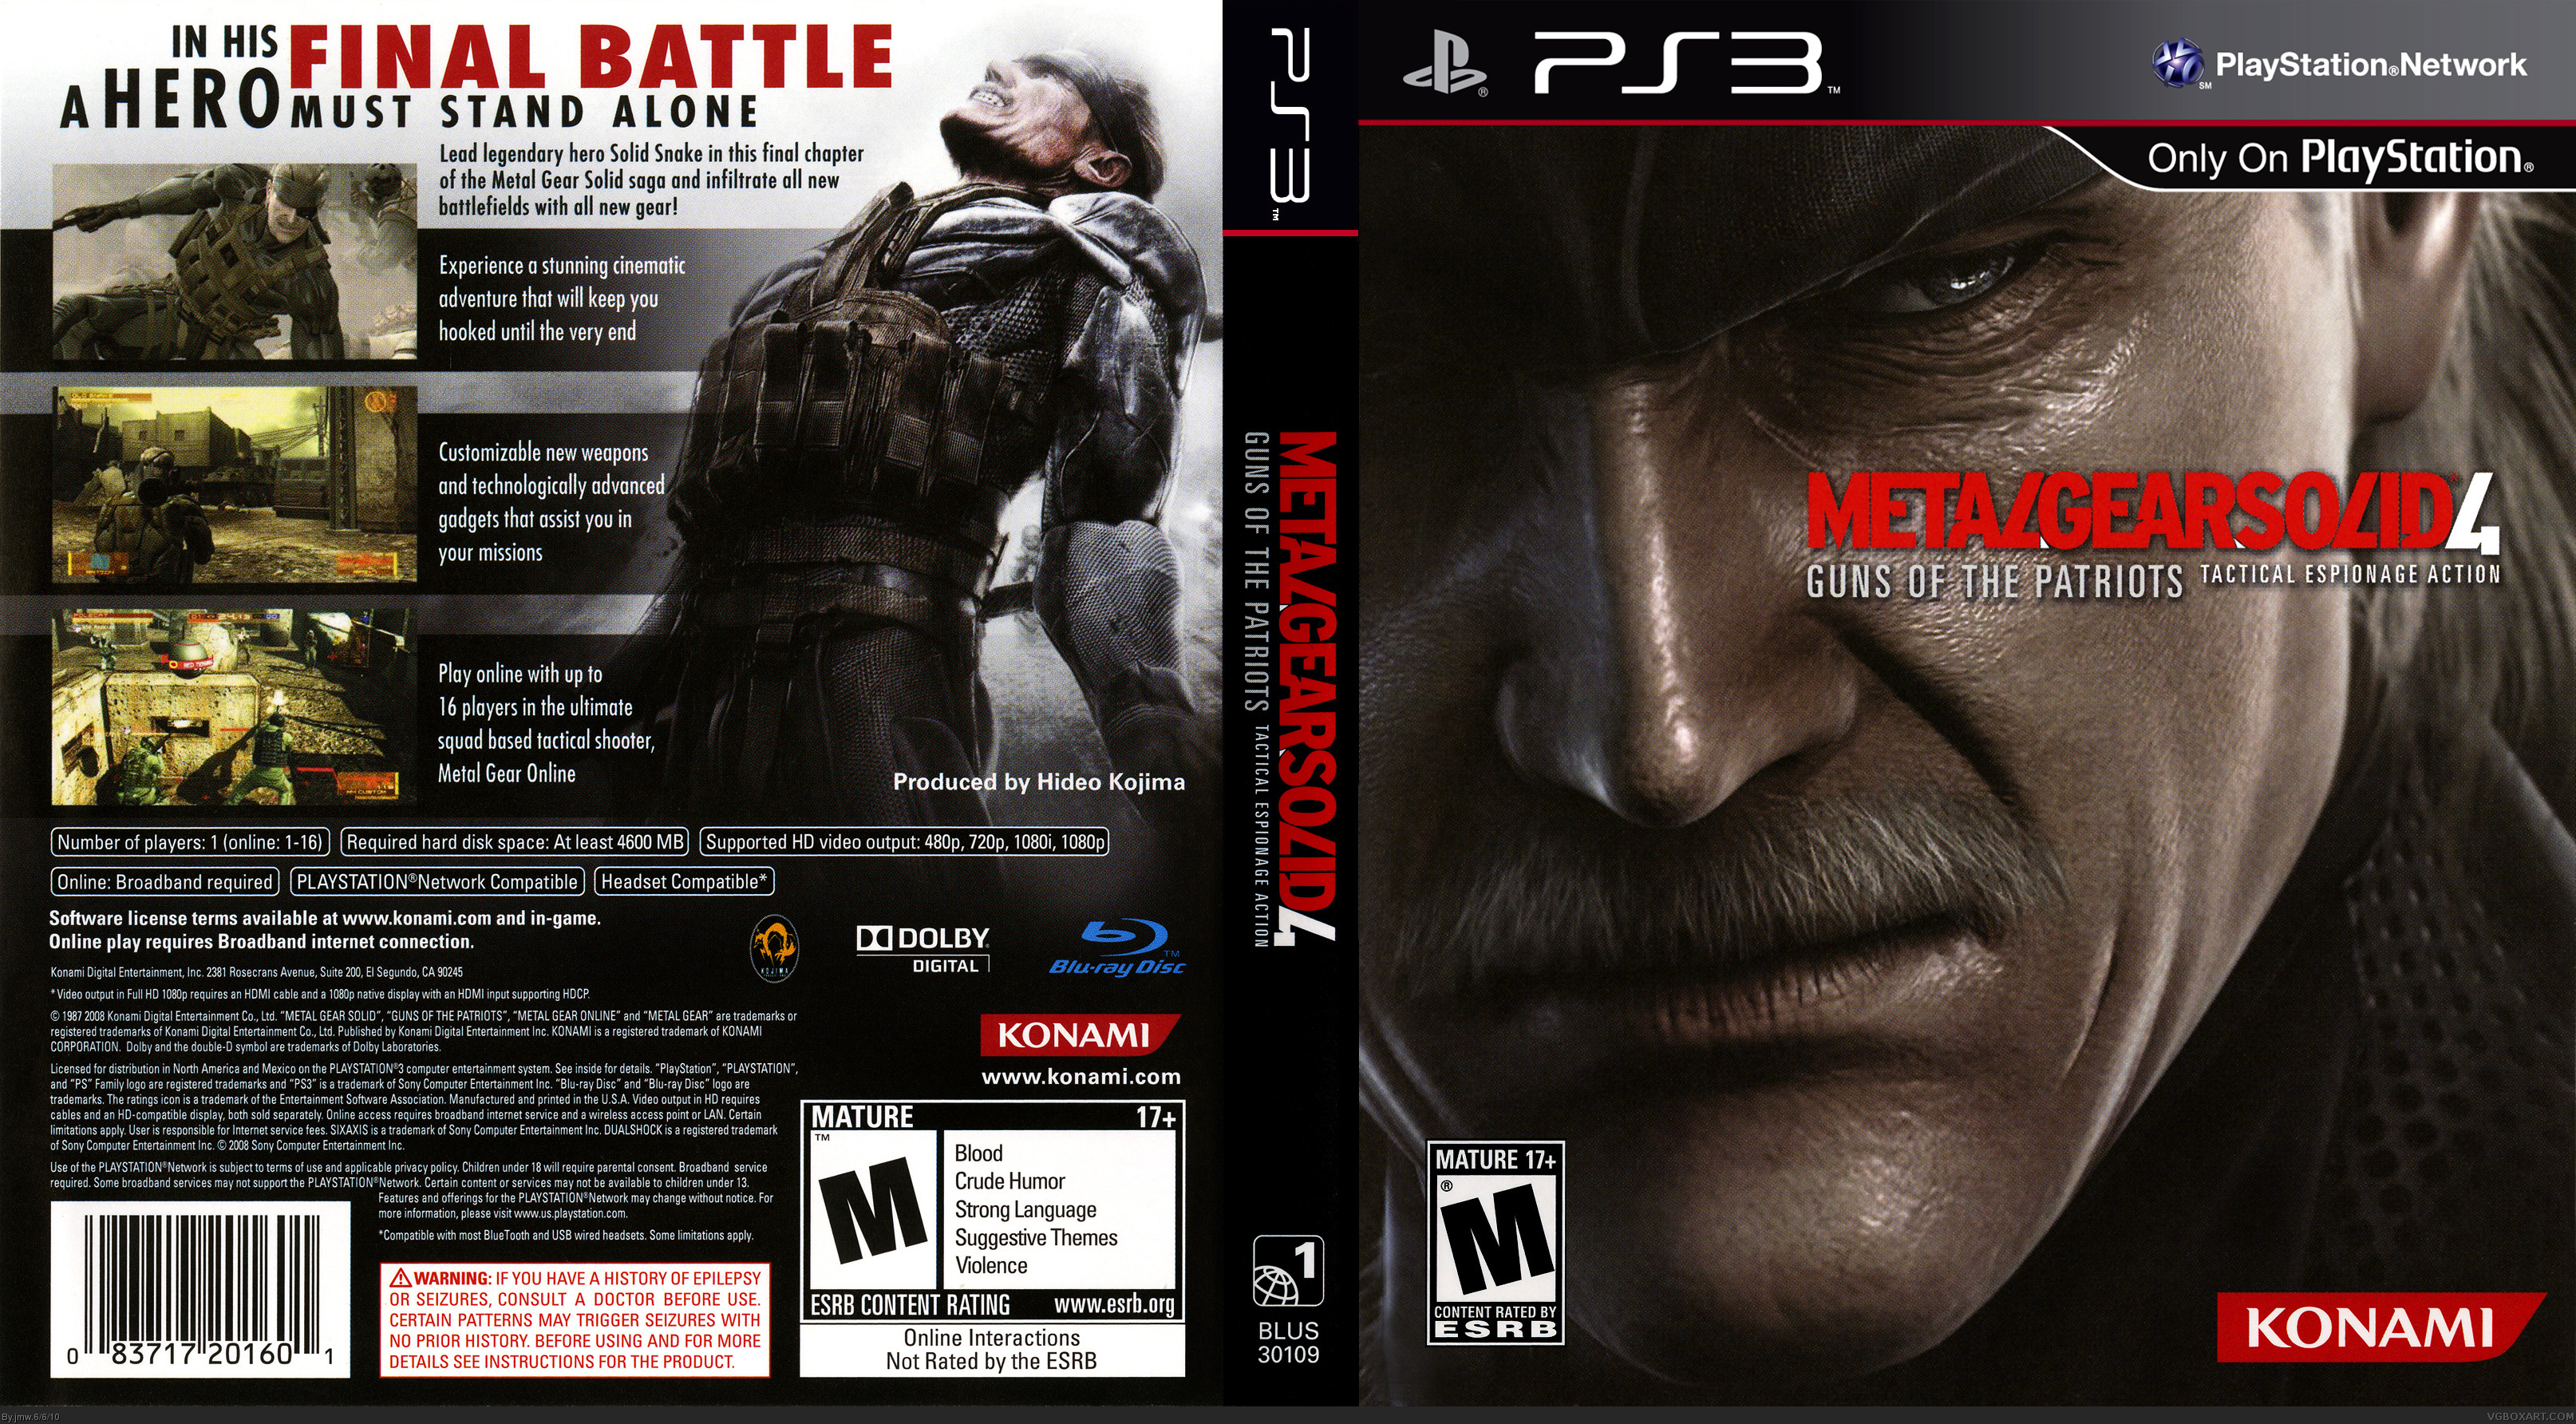 Metal Gear Solid 4: Guns of the Patriots box cover